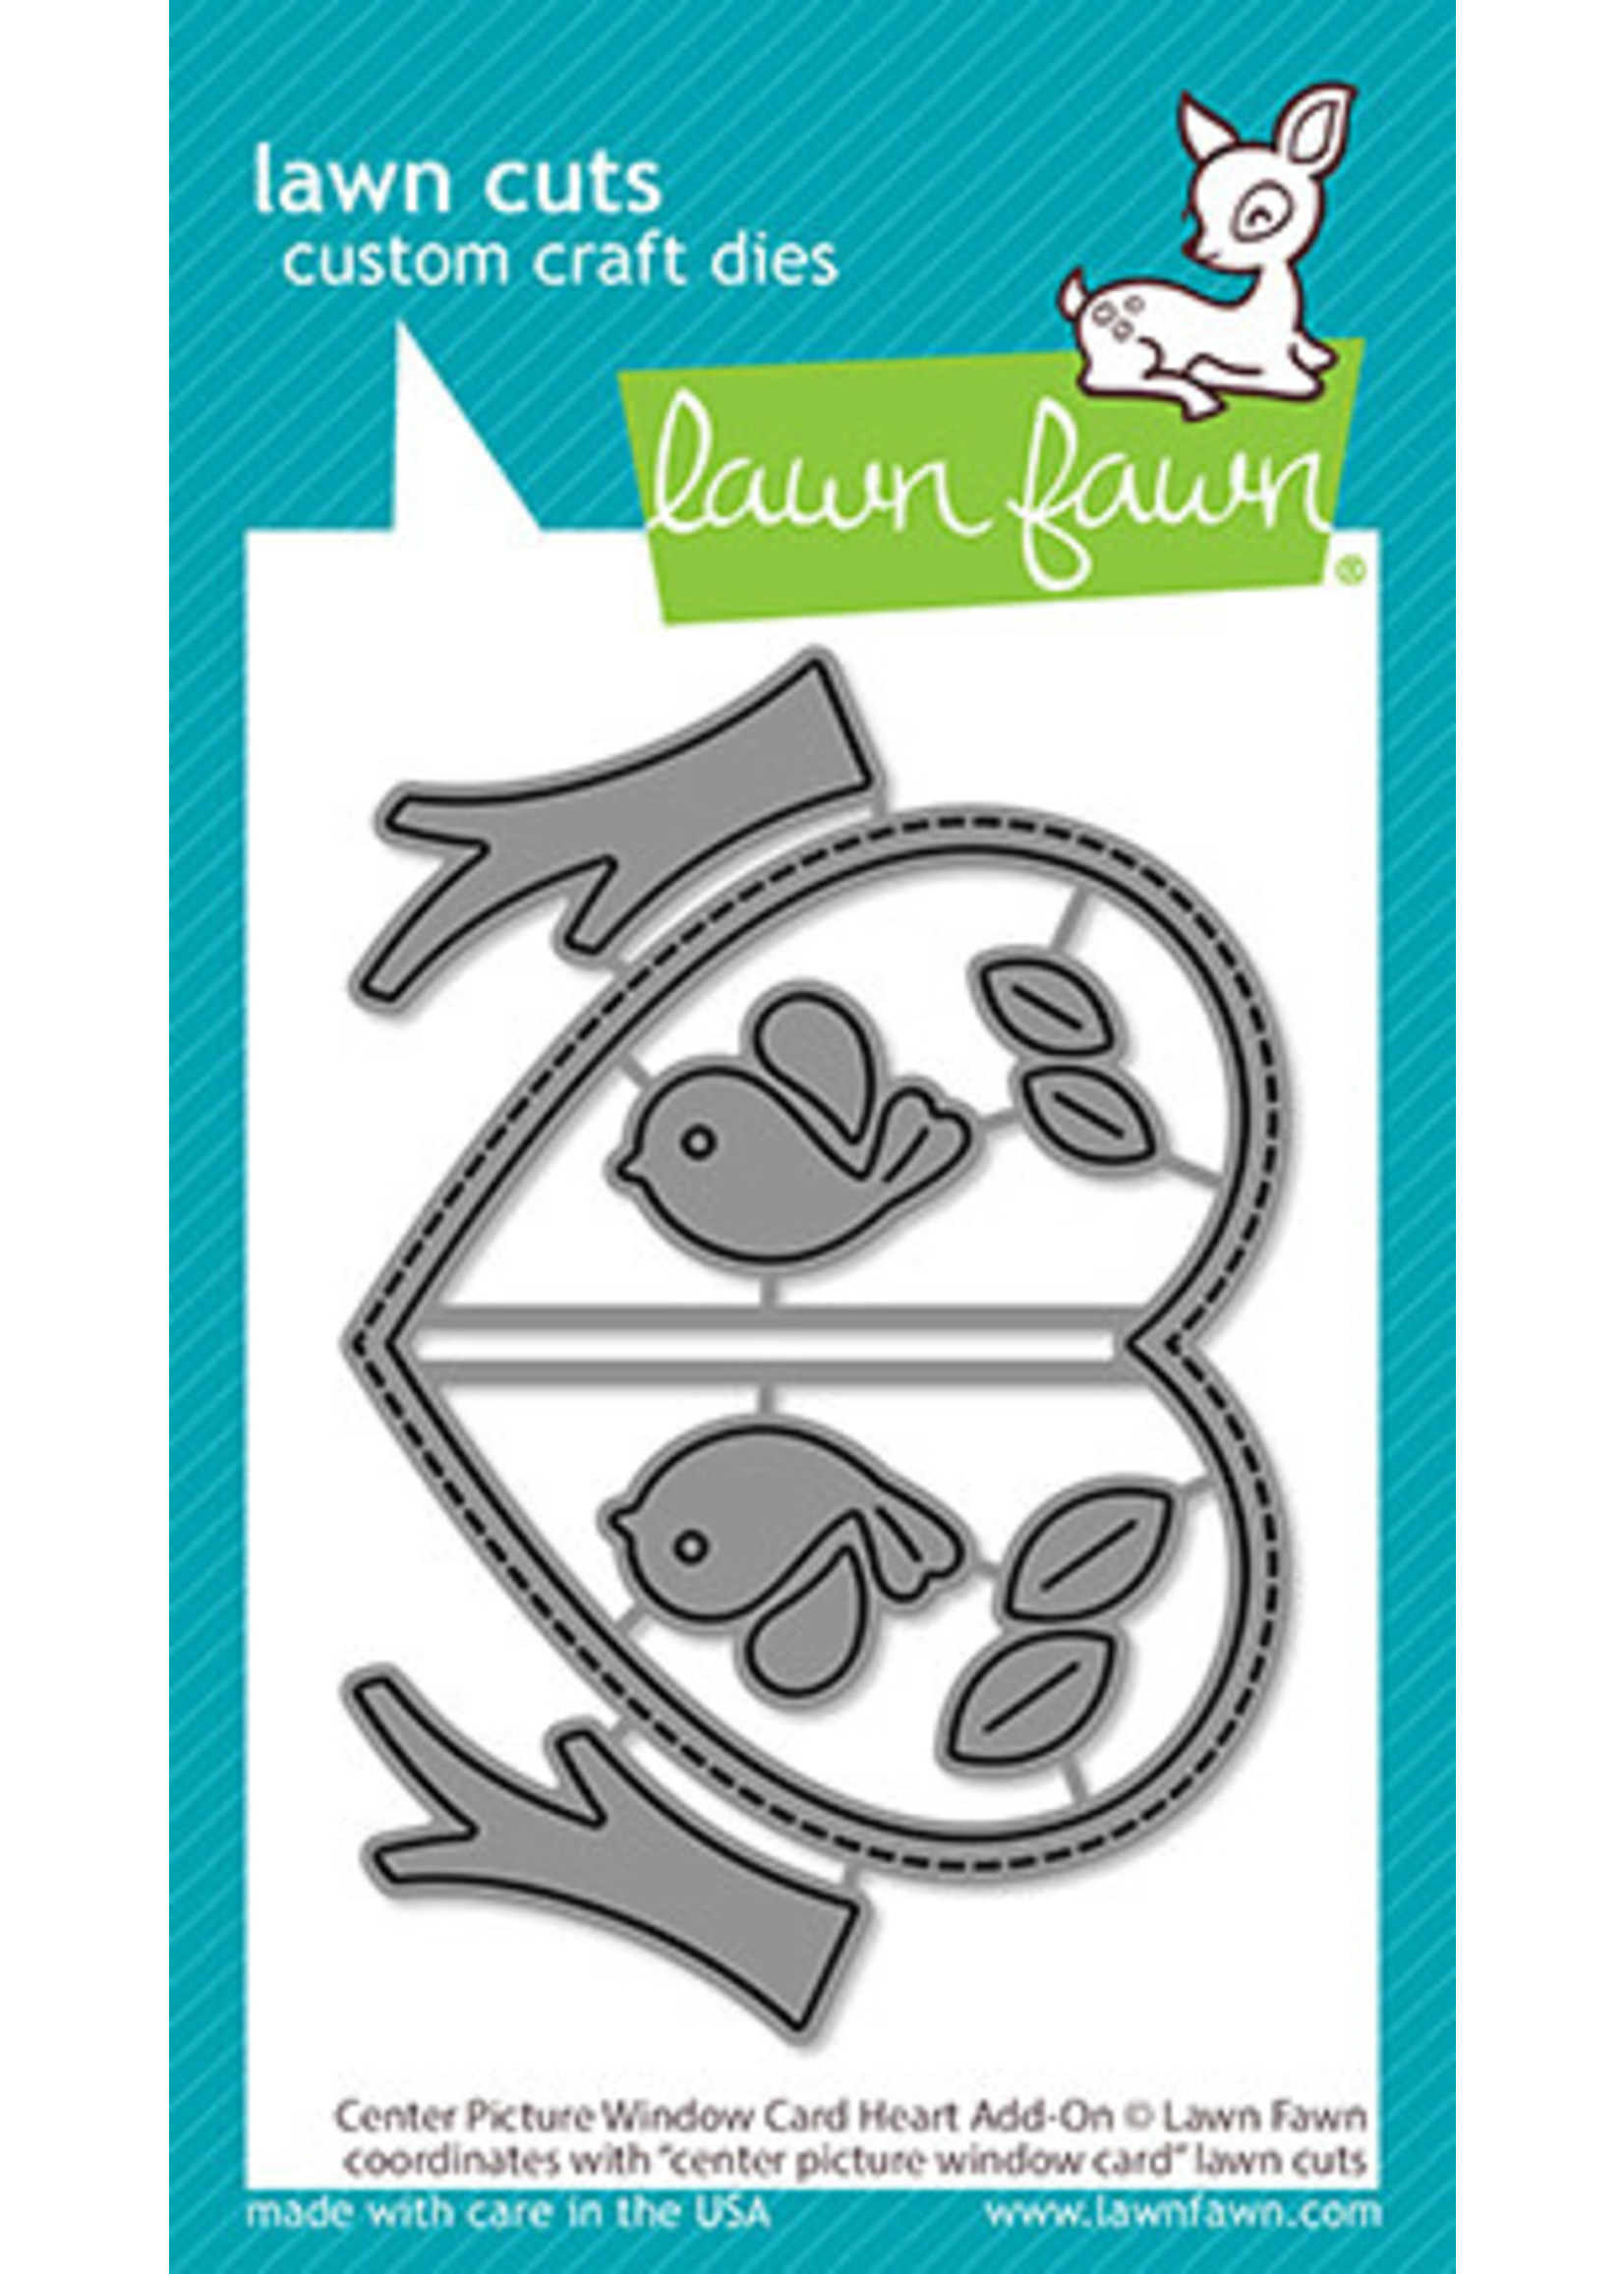 Lawn Fawn center picture window card heart add-on die